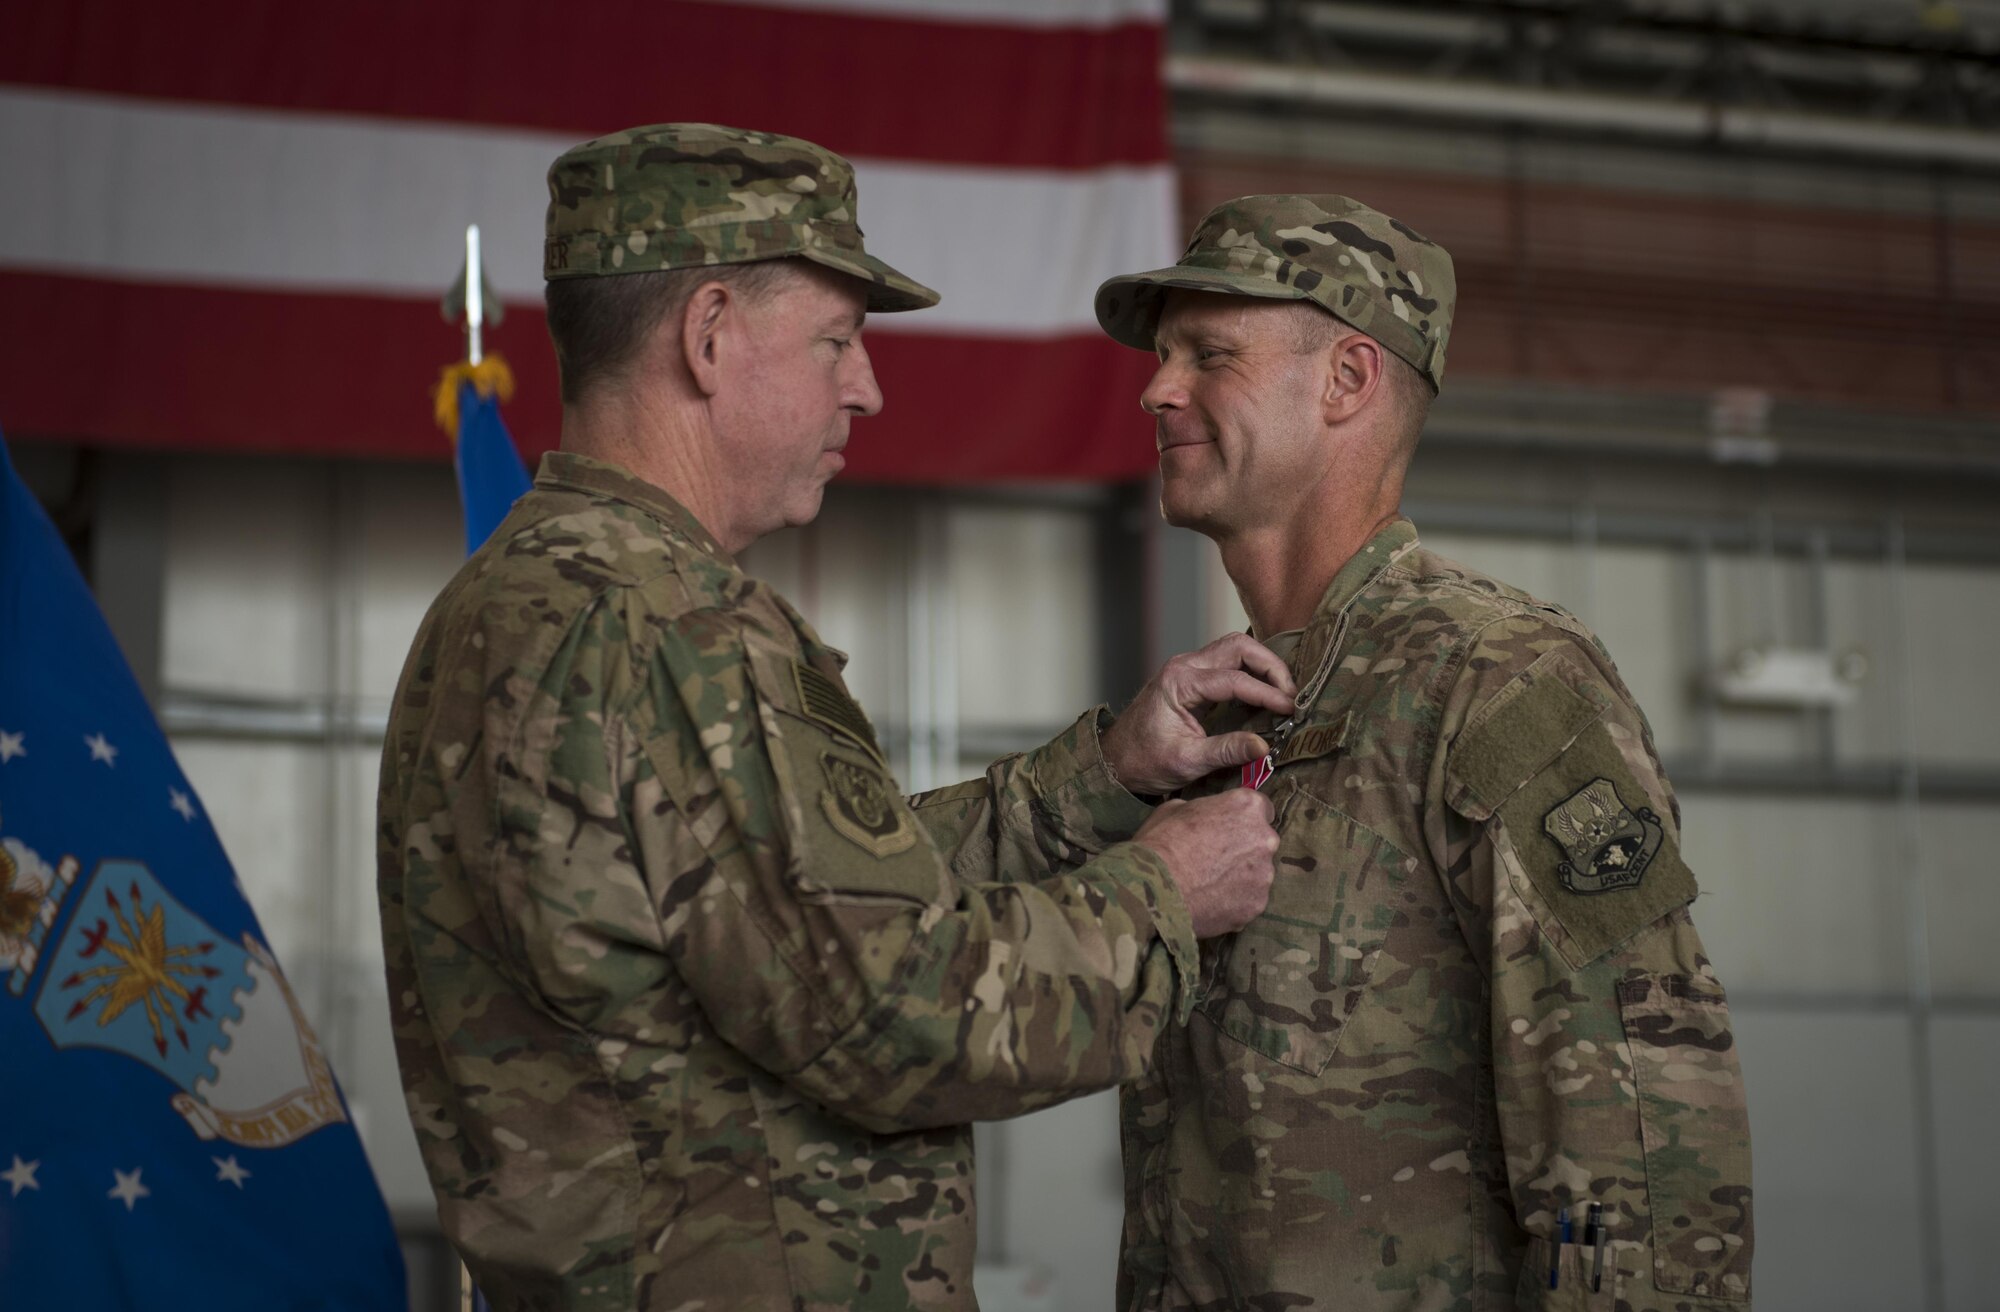 Brig. Gen. Jim Sears, the outgoing 455th Air Expeditionary Wing commander, receives the Bronze Star Medal from Maj. Gen. James Hecker, the 9th Air and Space Expeditionary Task Force-Afghanistan commander, during a change of command ceremony at Bagram Airfield, Afghanistan, June 3, 2017. Sears commanded the 455th AEW for the last 12 months. During his time at Bagram, Sears’ leadership enabled 15,800 combat sorties, accumulating to 102,877 combat hours, which resulted in more than 1,369 kinetic strike and 2,836 enemies killed in action. (U.S. Air Force photo by Staff Sgt. Benjamin Gonsier) 